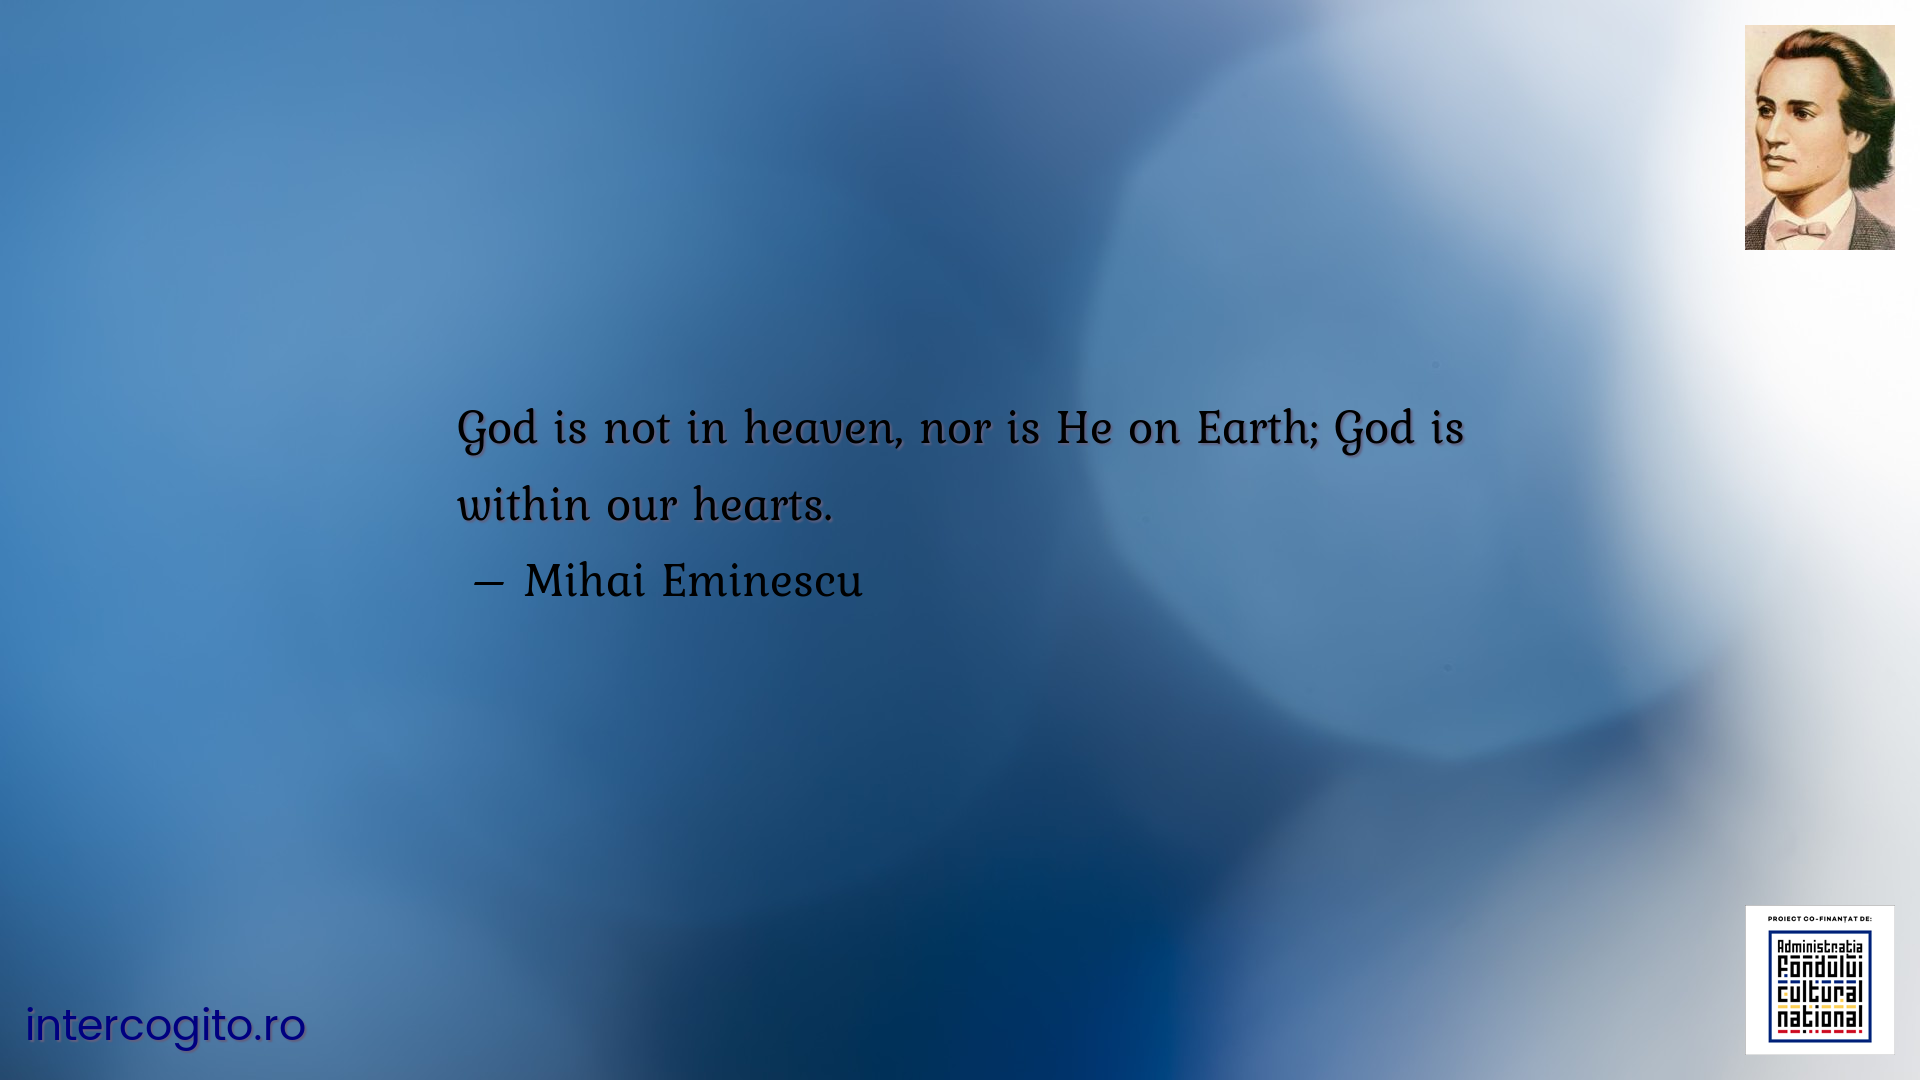 God is not in heaven, nor is He on Earth; God is within our hearts.